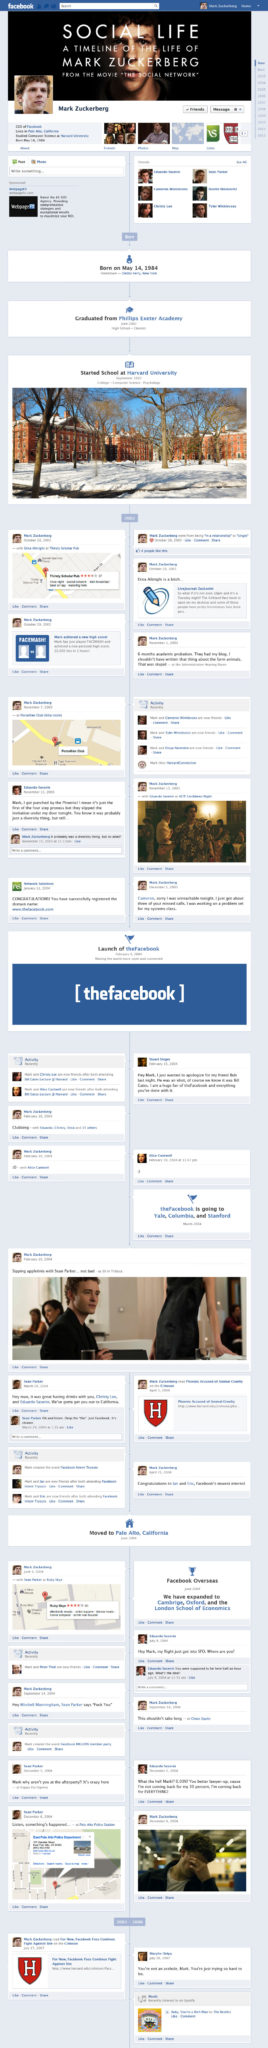 social network facebook infographic